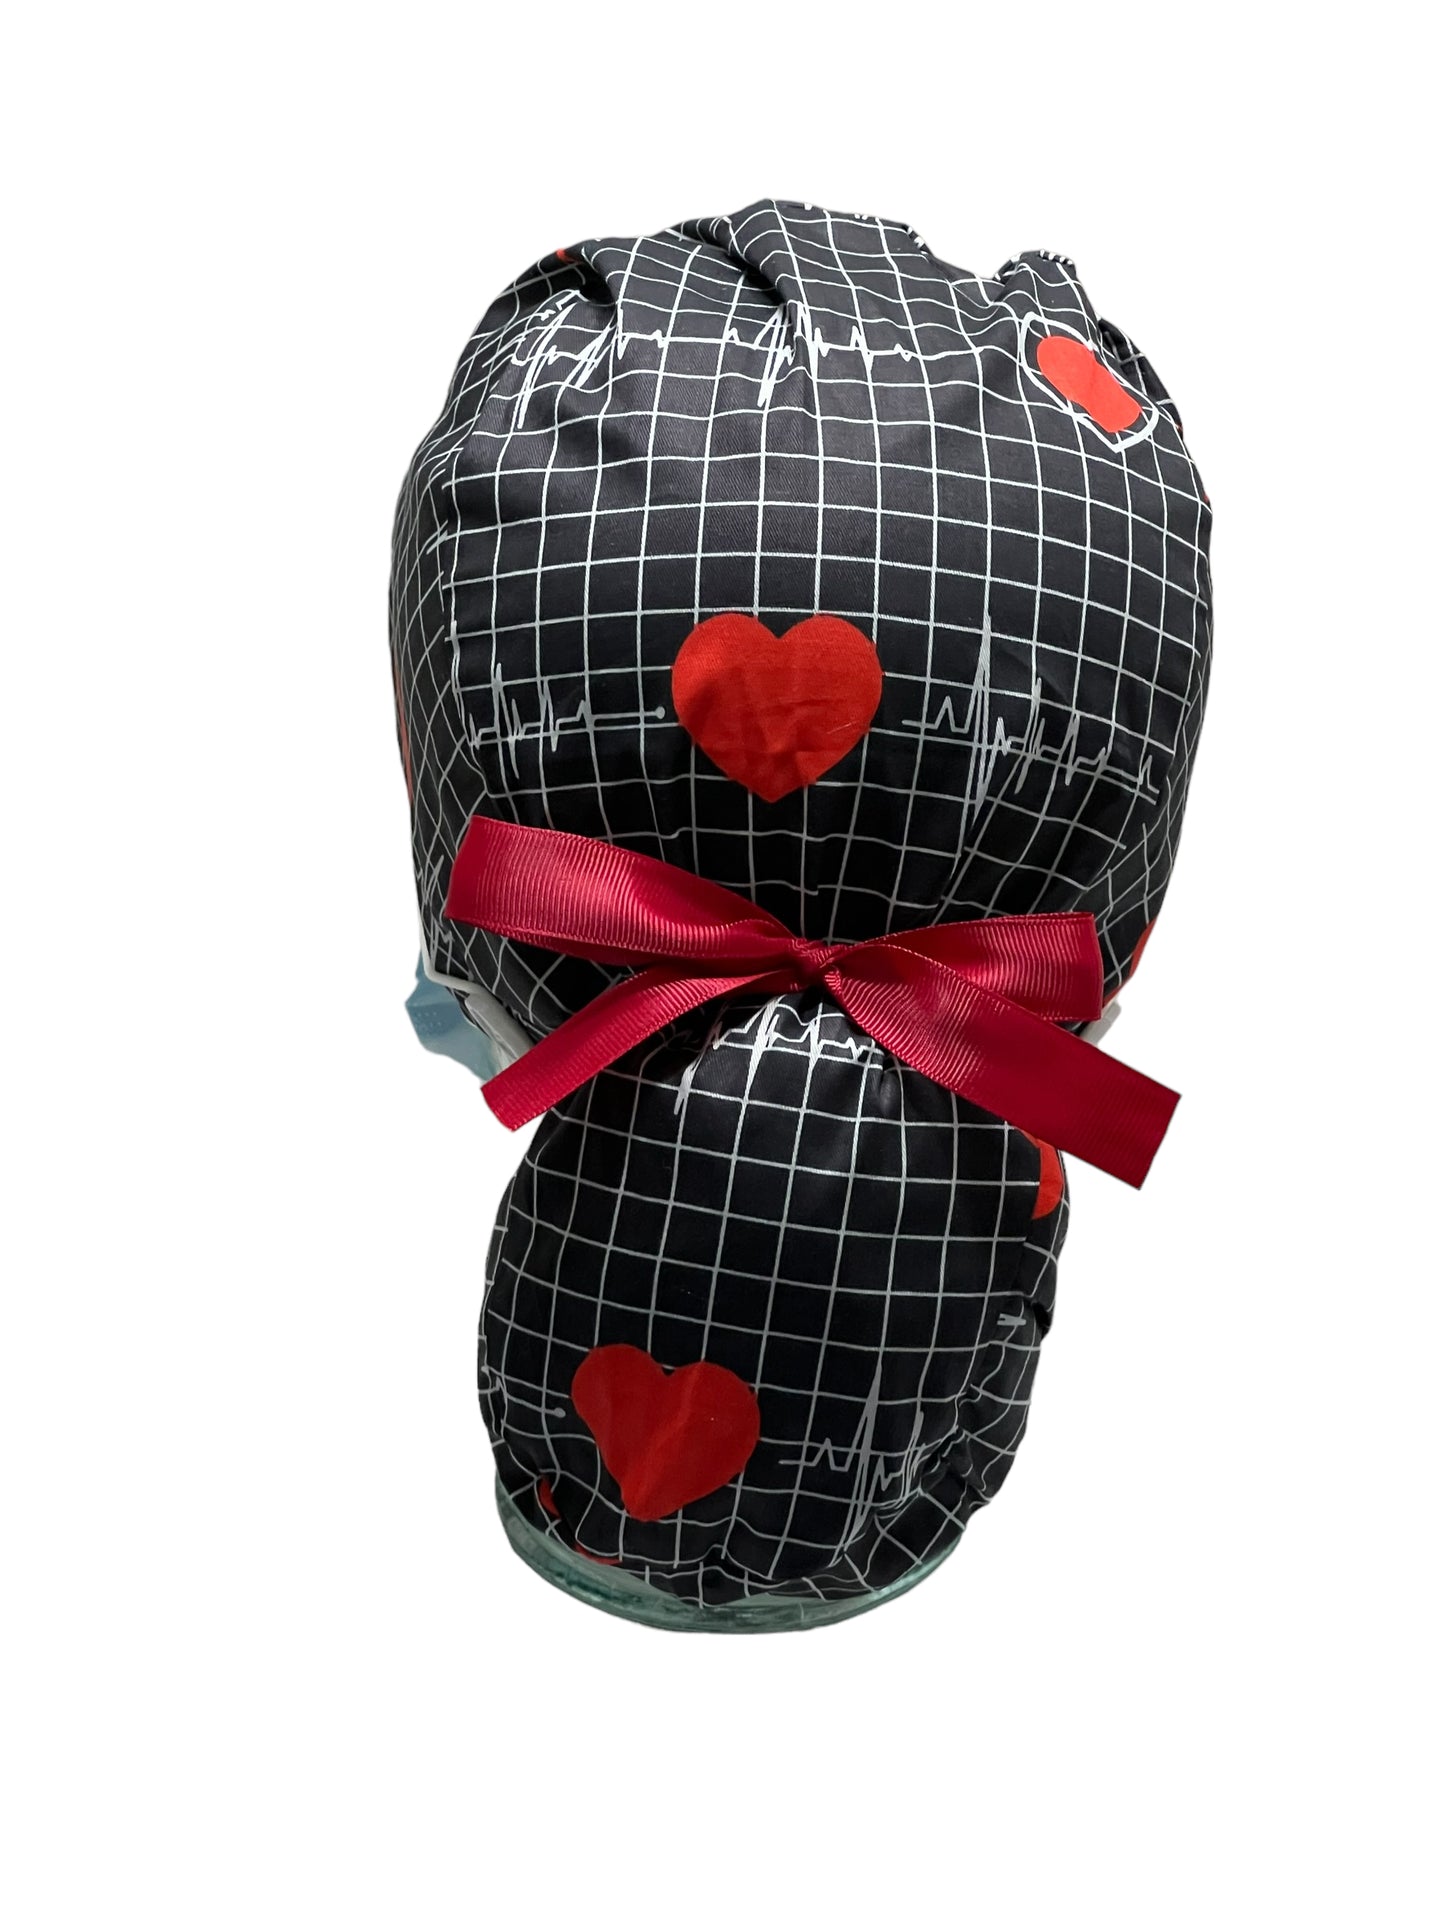 Ponytail Scrub Hat-EKG with Buttons